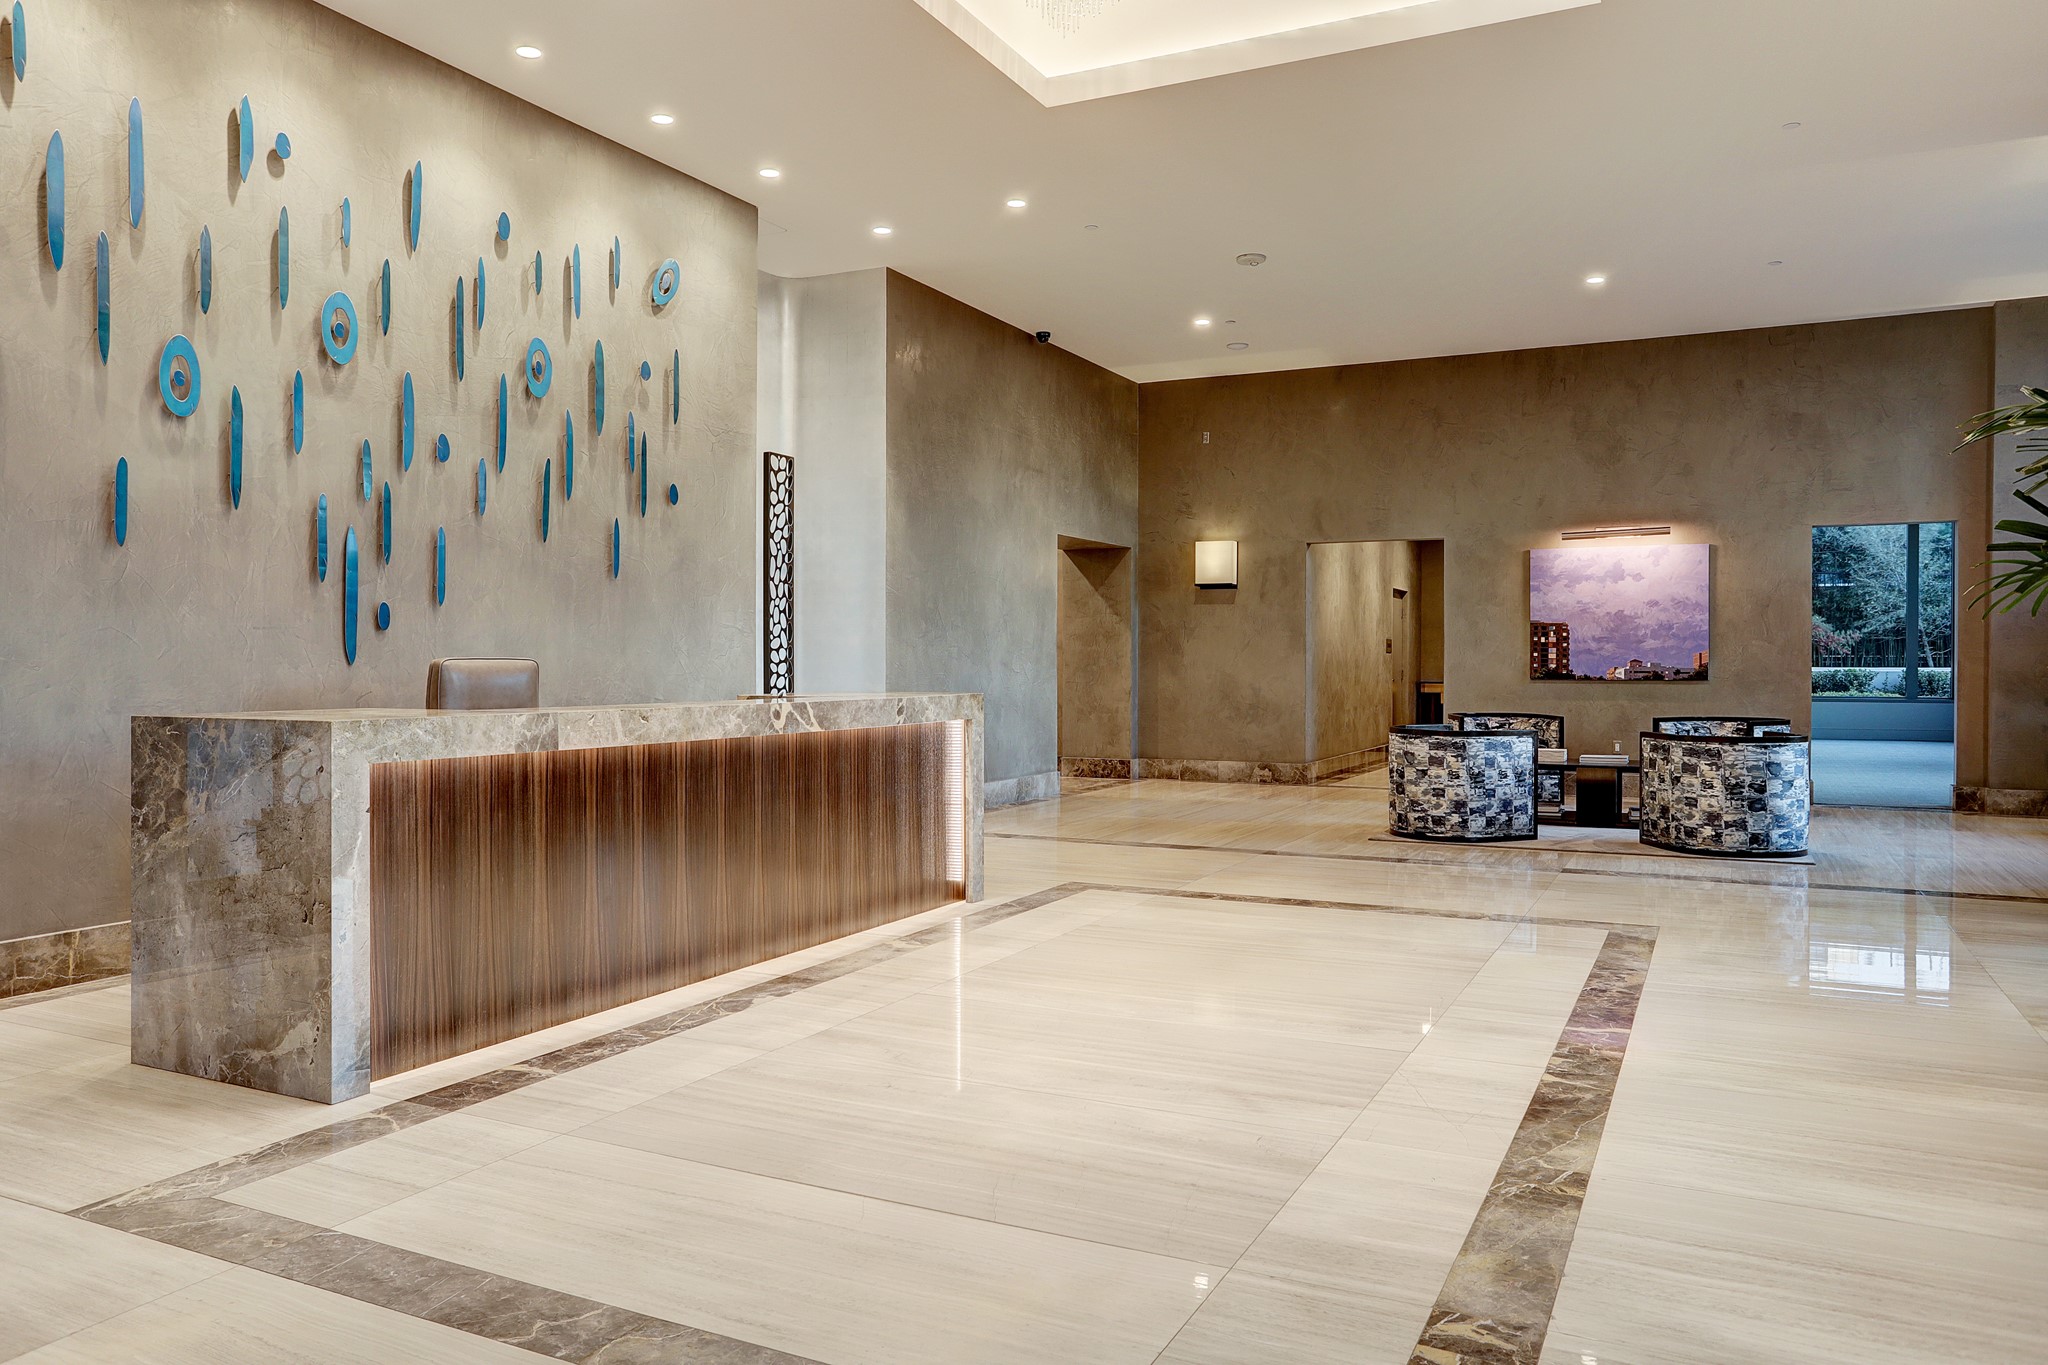 Building Lobby. The Belfiore is a full service building including valet, concierge, pool, party room and fitness center.